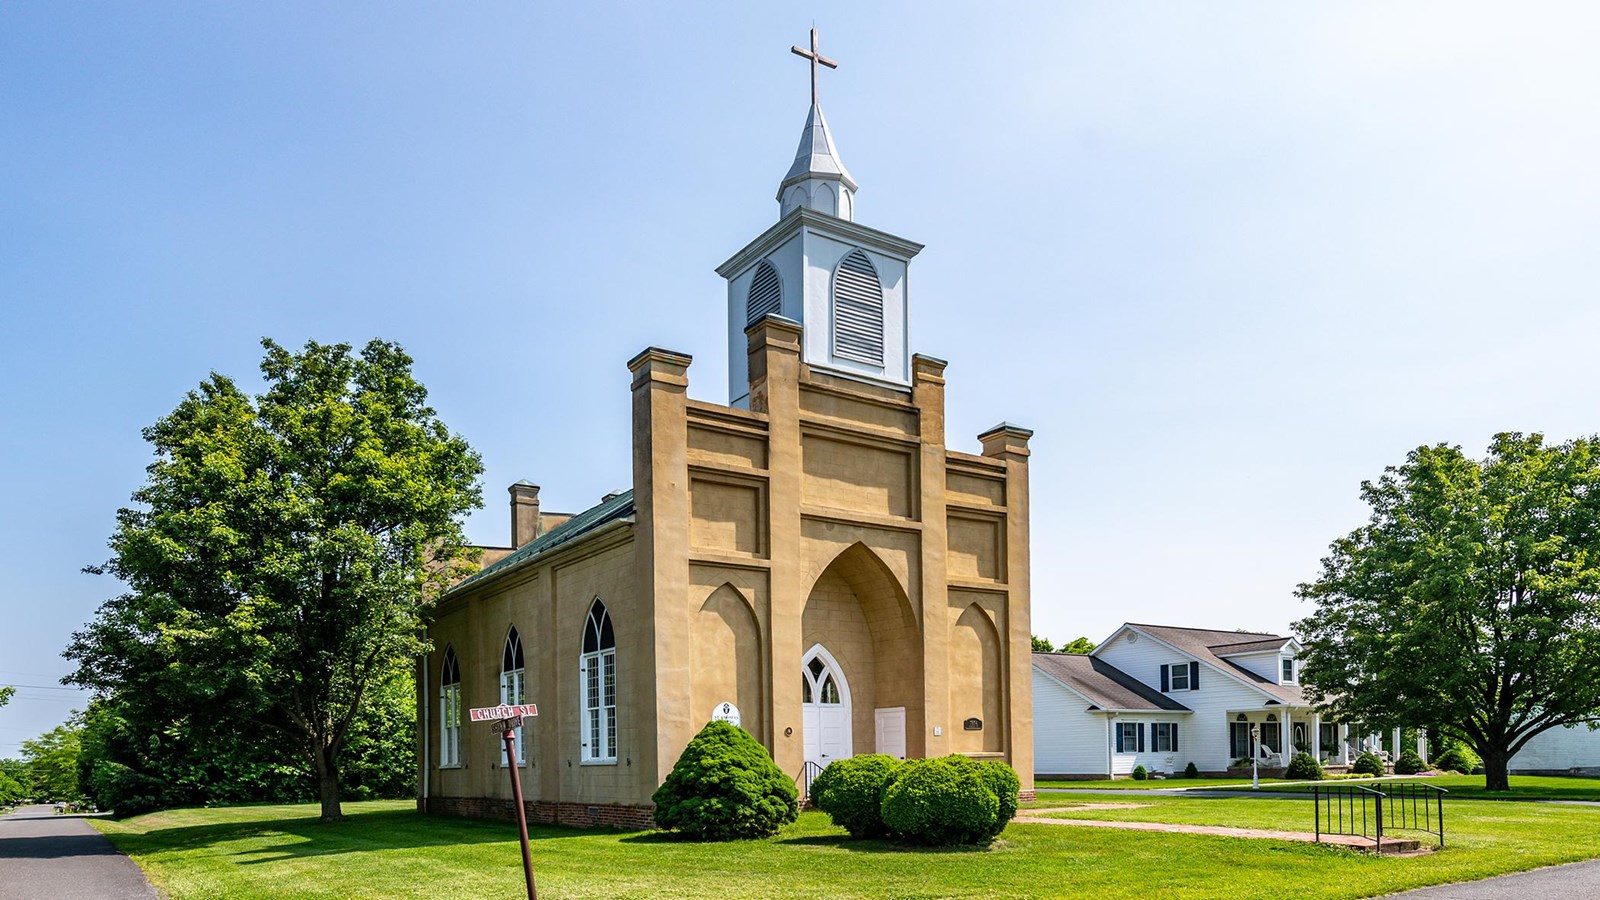 A small gothic revival style church has pointed arch windows and a buff color exterior.